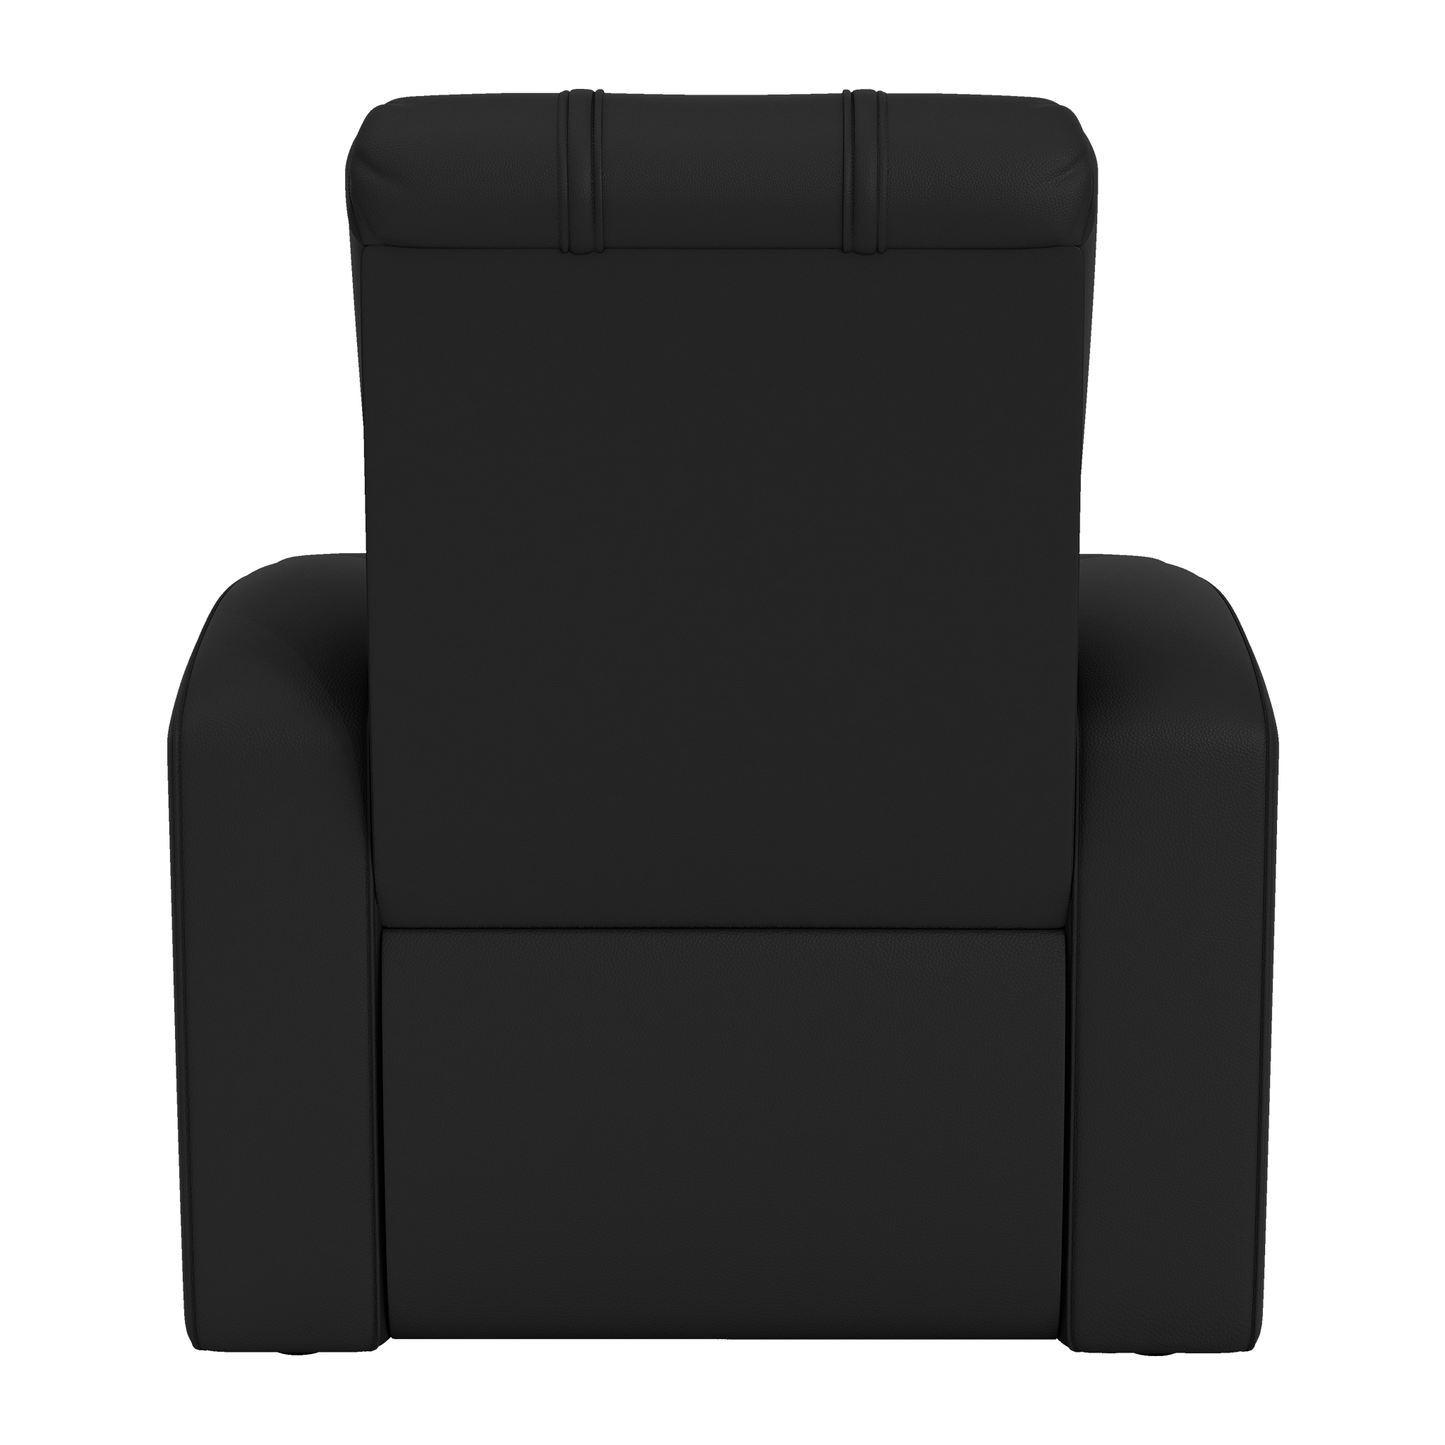 Relax Home Theater Recliner with Youngstown State Secondary Logo